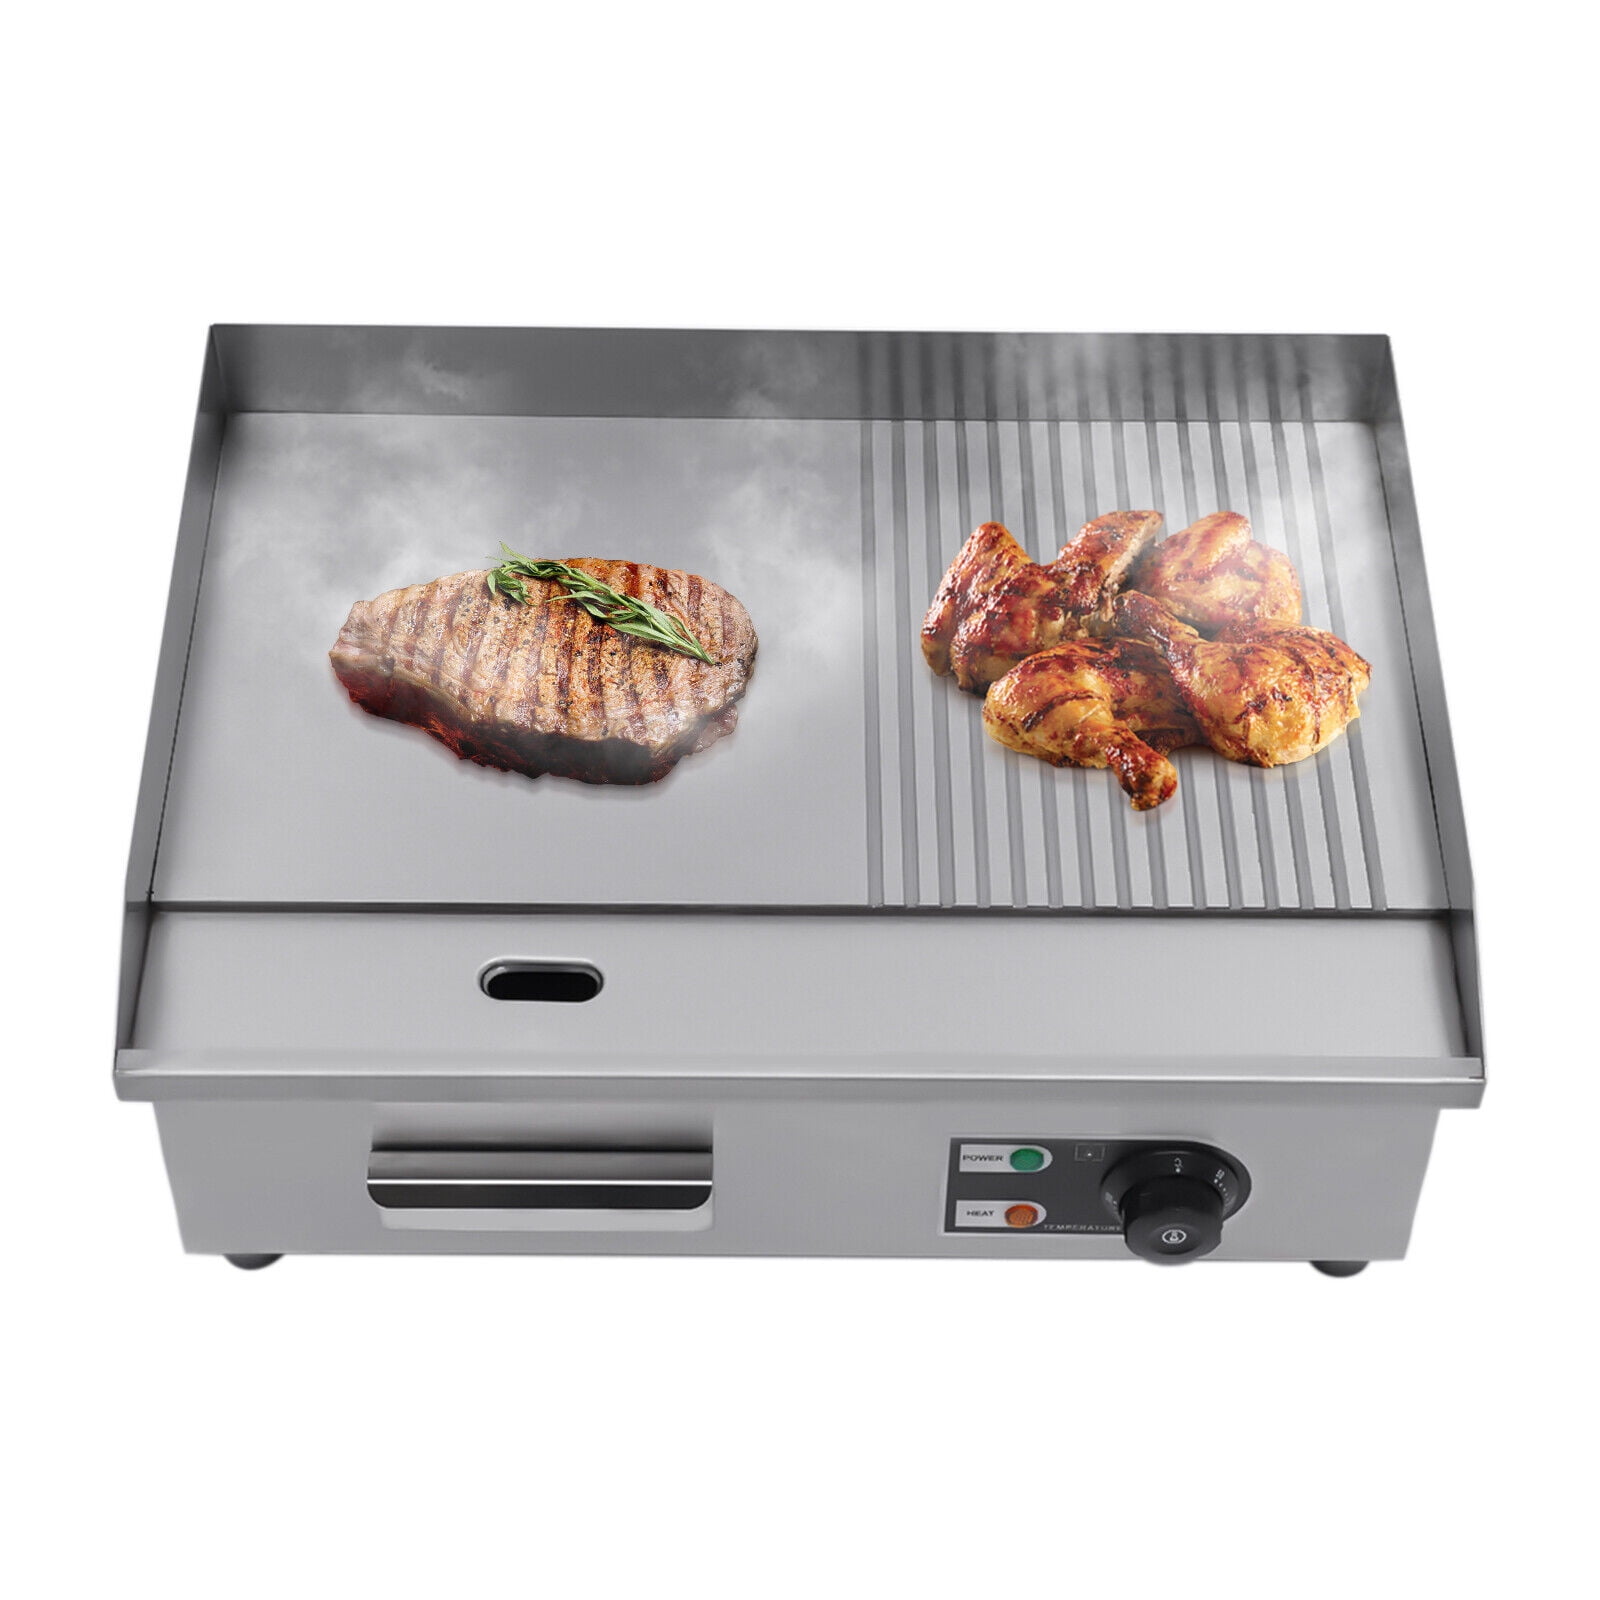 Wuzstar 1600W Electric Countertop Griddle Grill Half Grooved/Flat ...